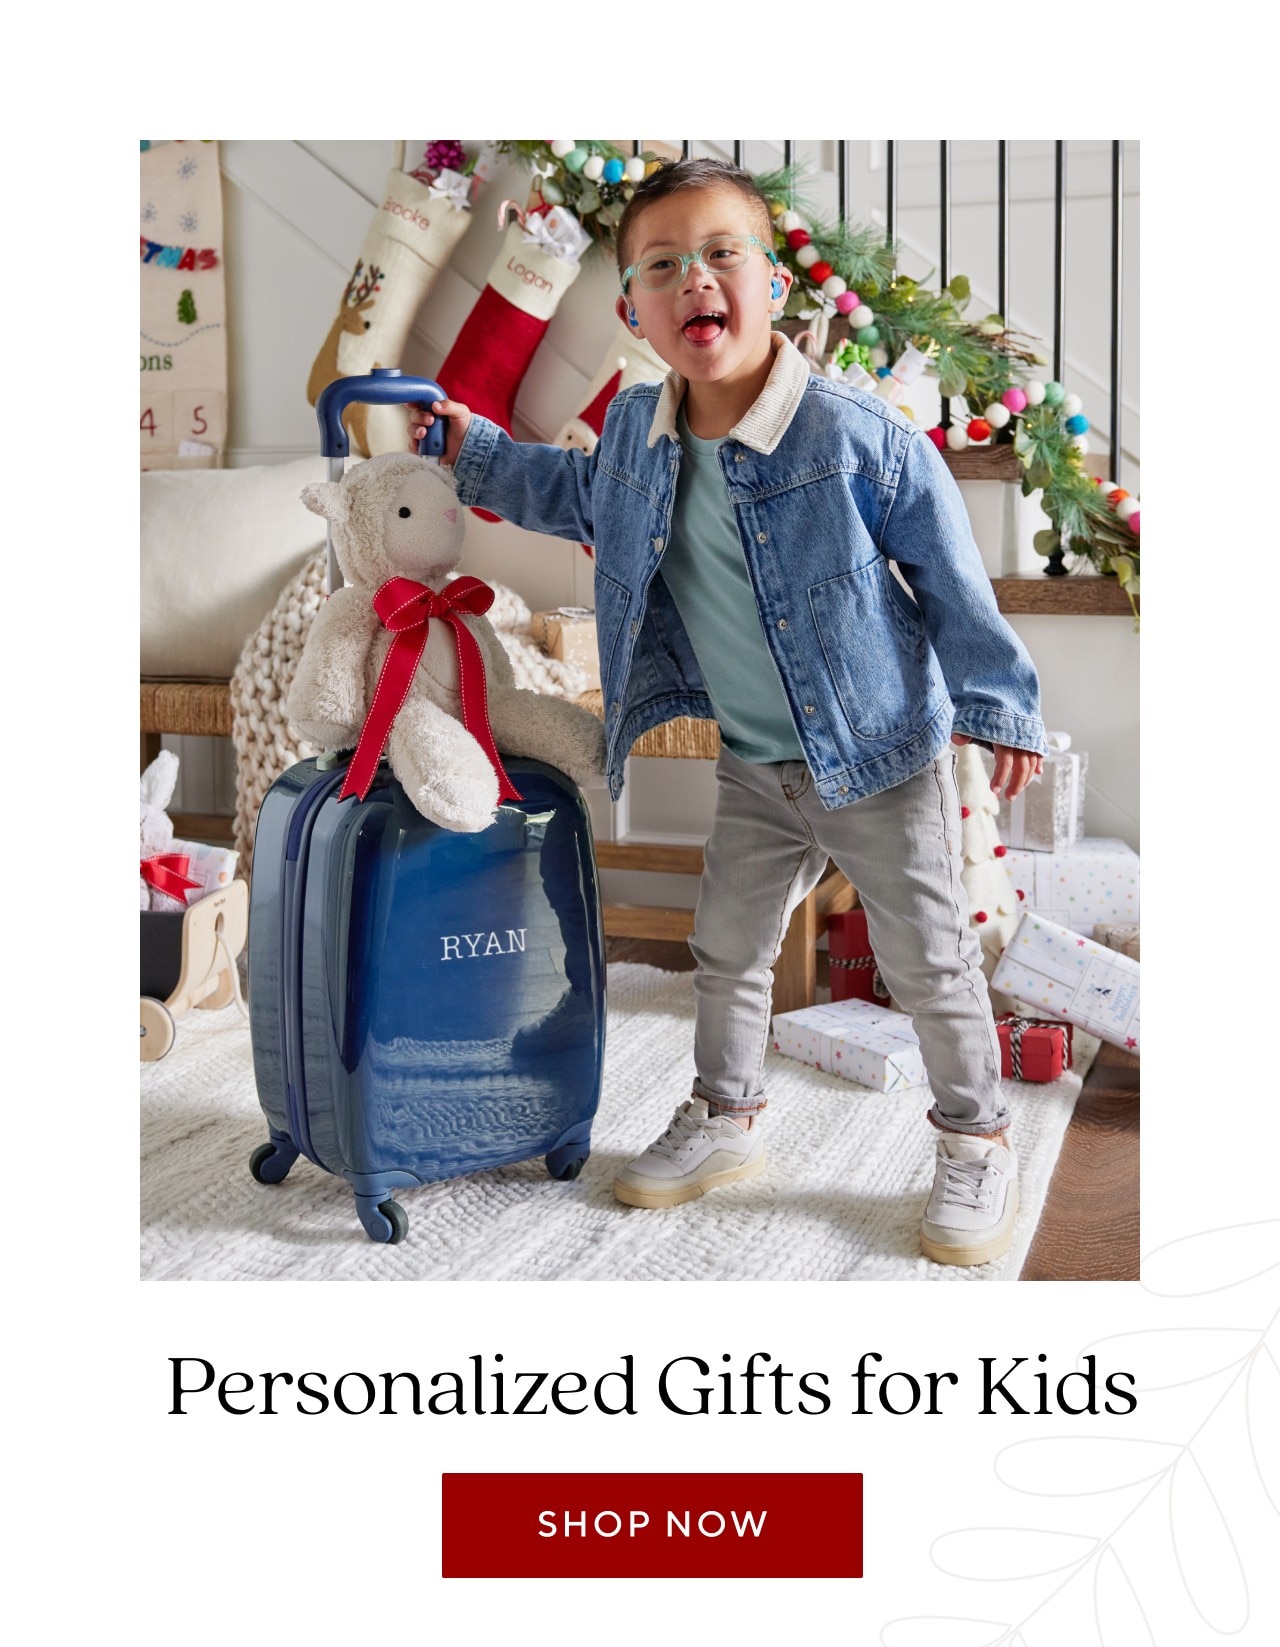 PERSONALIZED GIFTS FOR KIDS